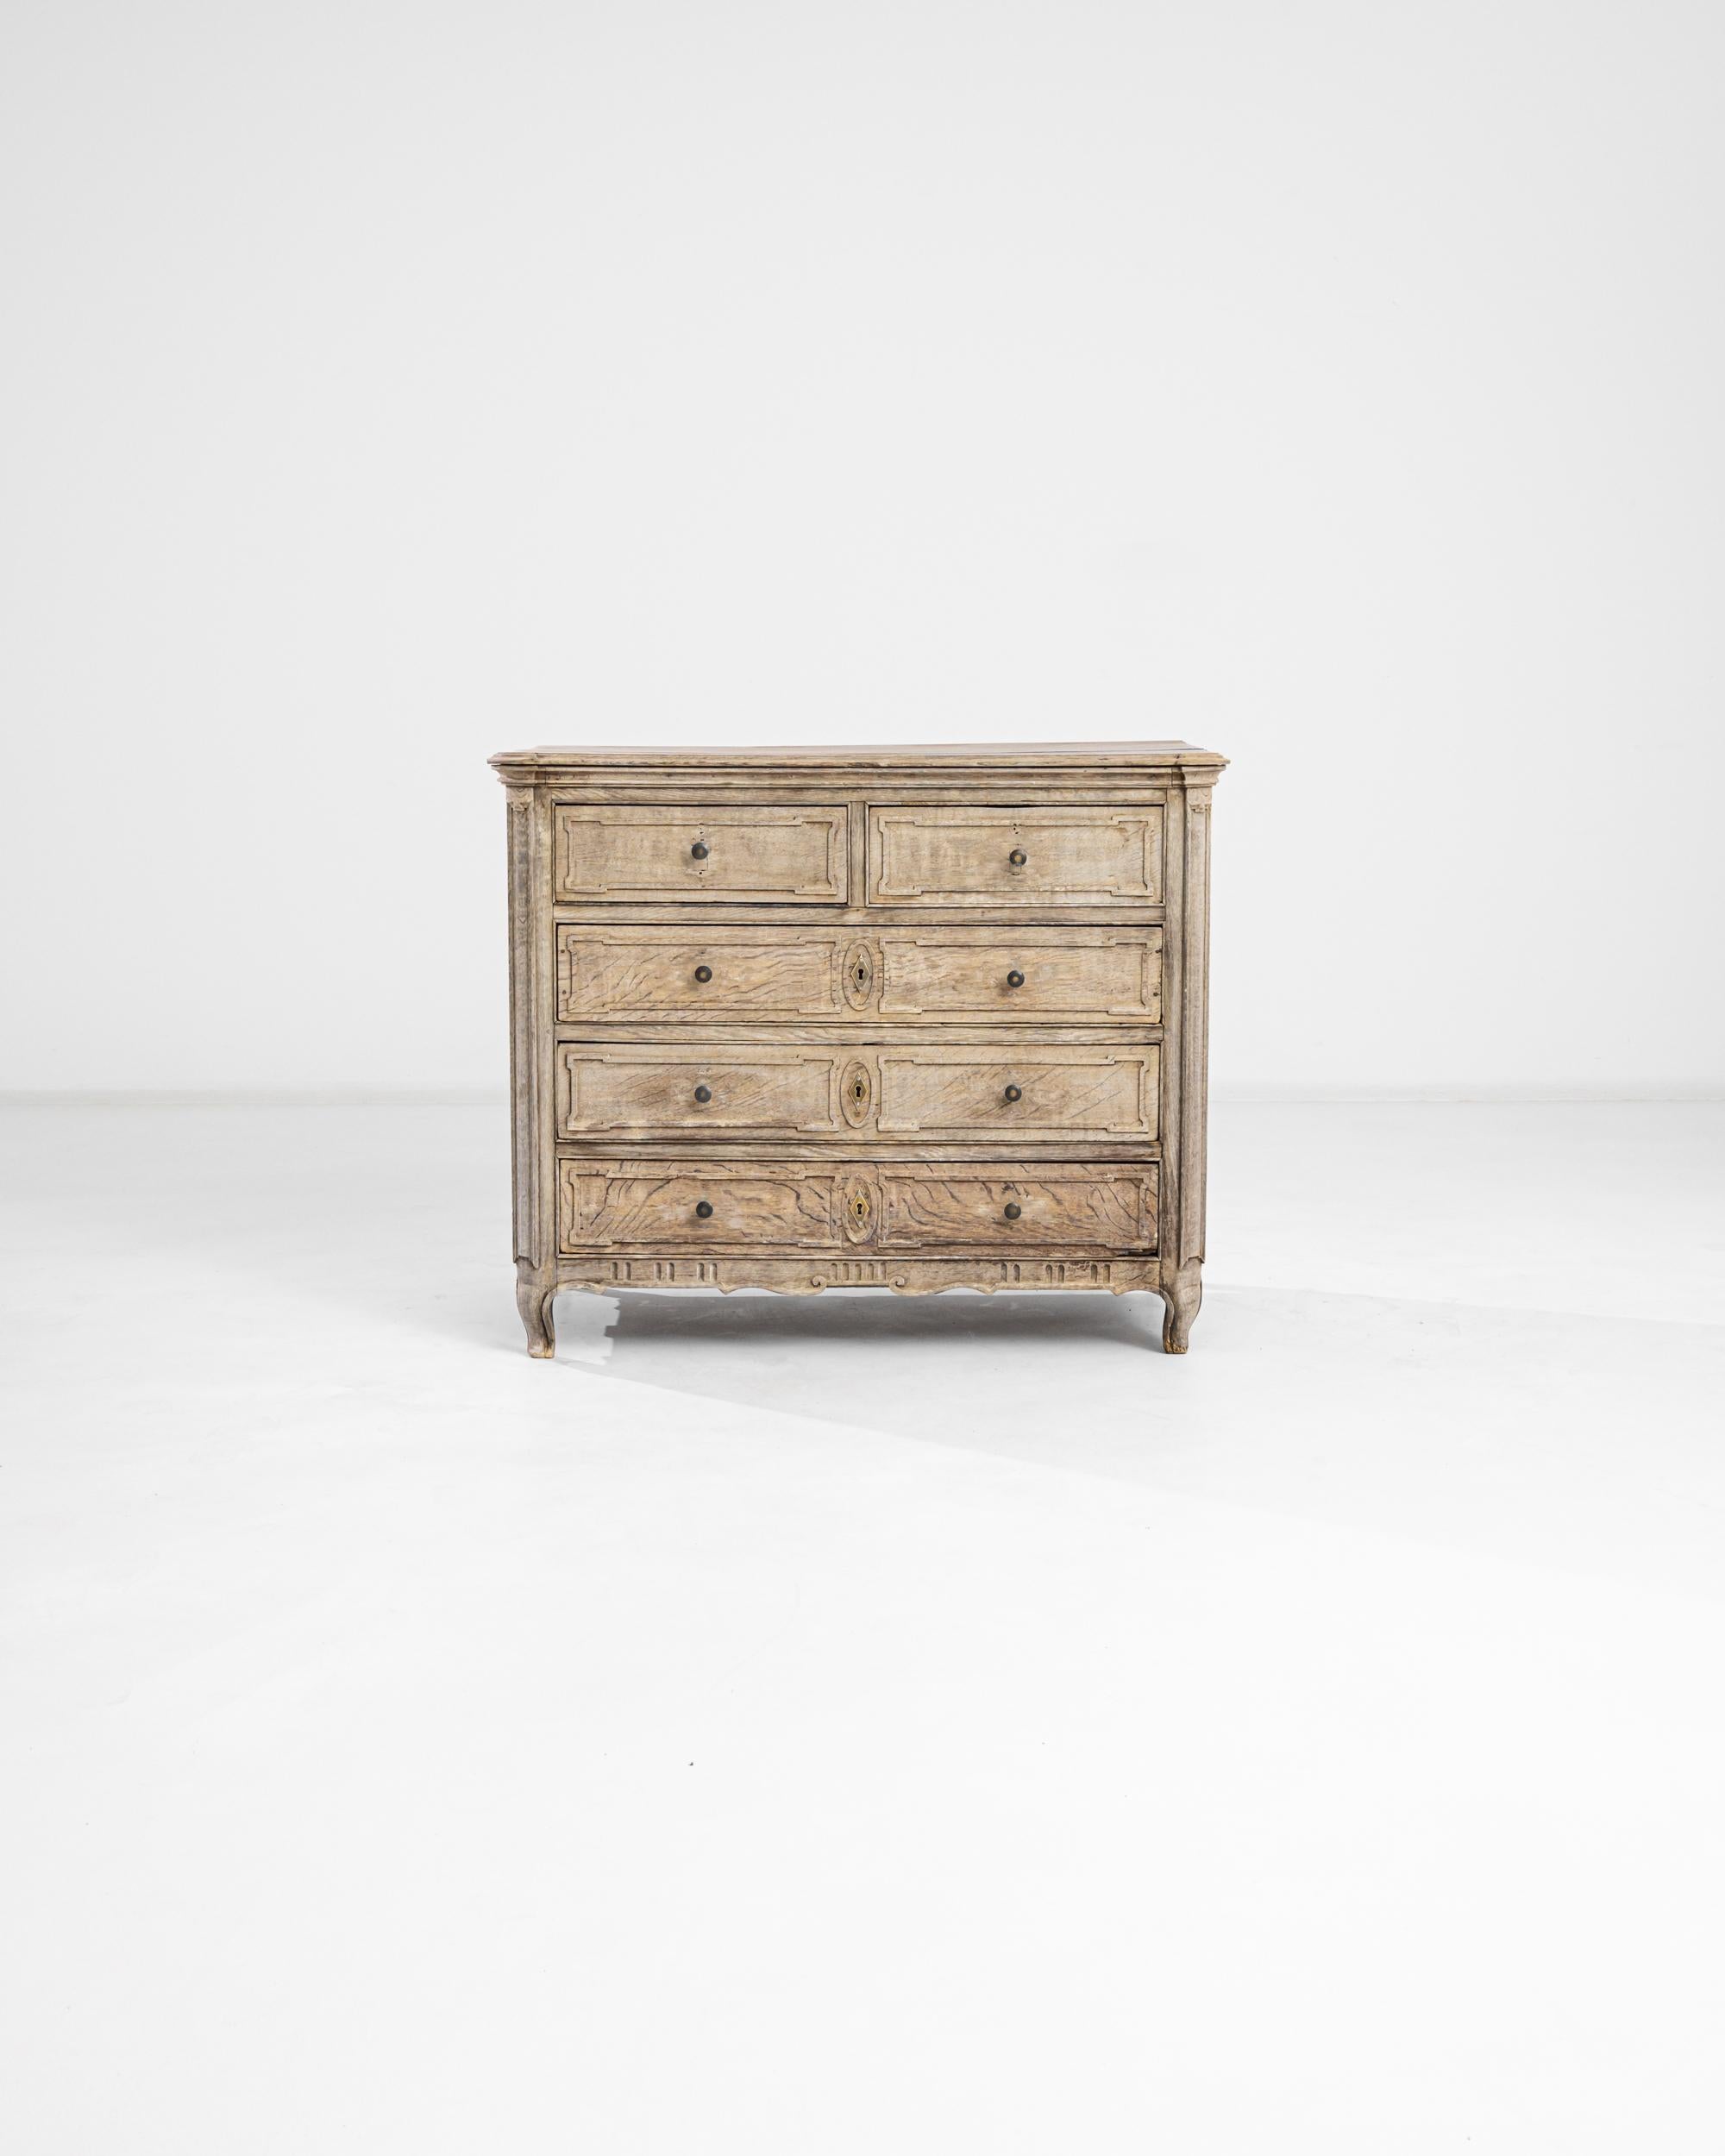 Elegant paneling in natural oak gives this chest of drawers an air of serene sophistication. Built in France in the 1820s, subtle curves lend a sensuous note to the upright case — carved oval accents circle the diamond-shaped lock pieces; cabriole